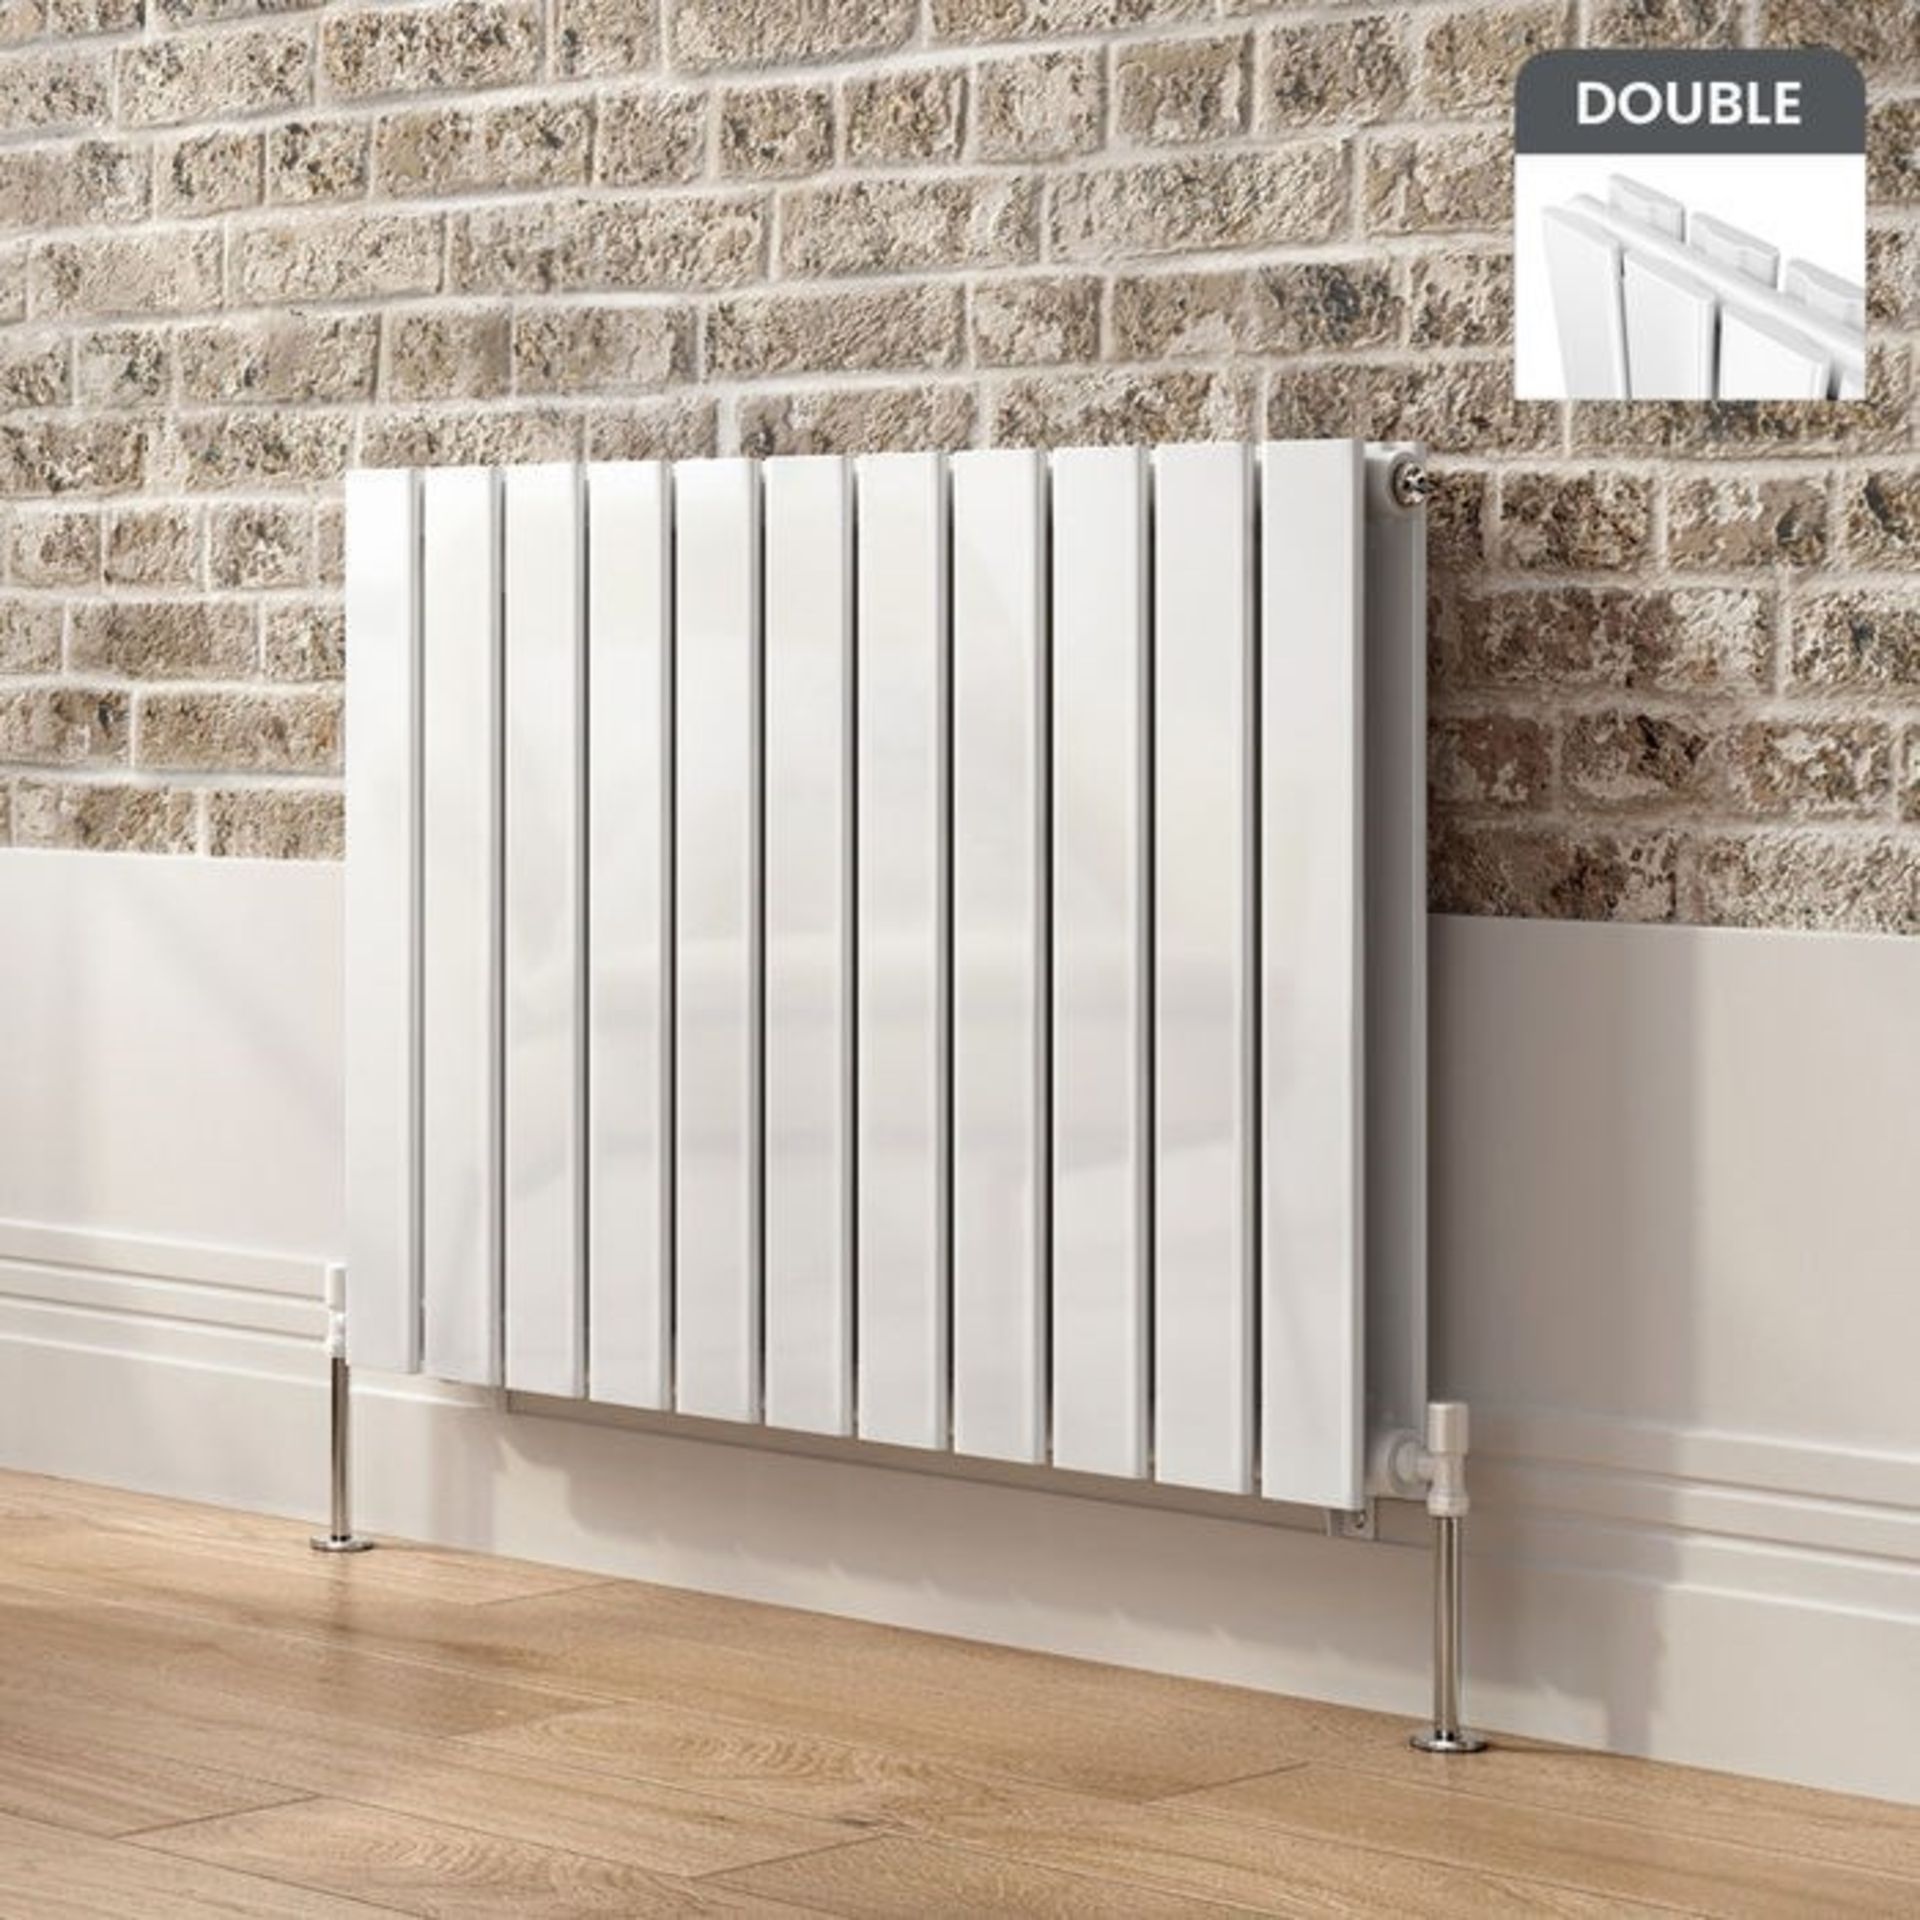 600x830mm Gloss White Double Flat Panel Horizontal Radiator. RRP £474.99.RC221.Made with high... - Image 3 of 3